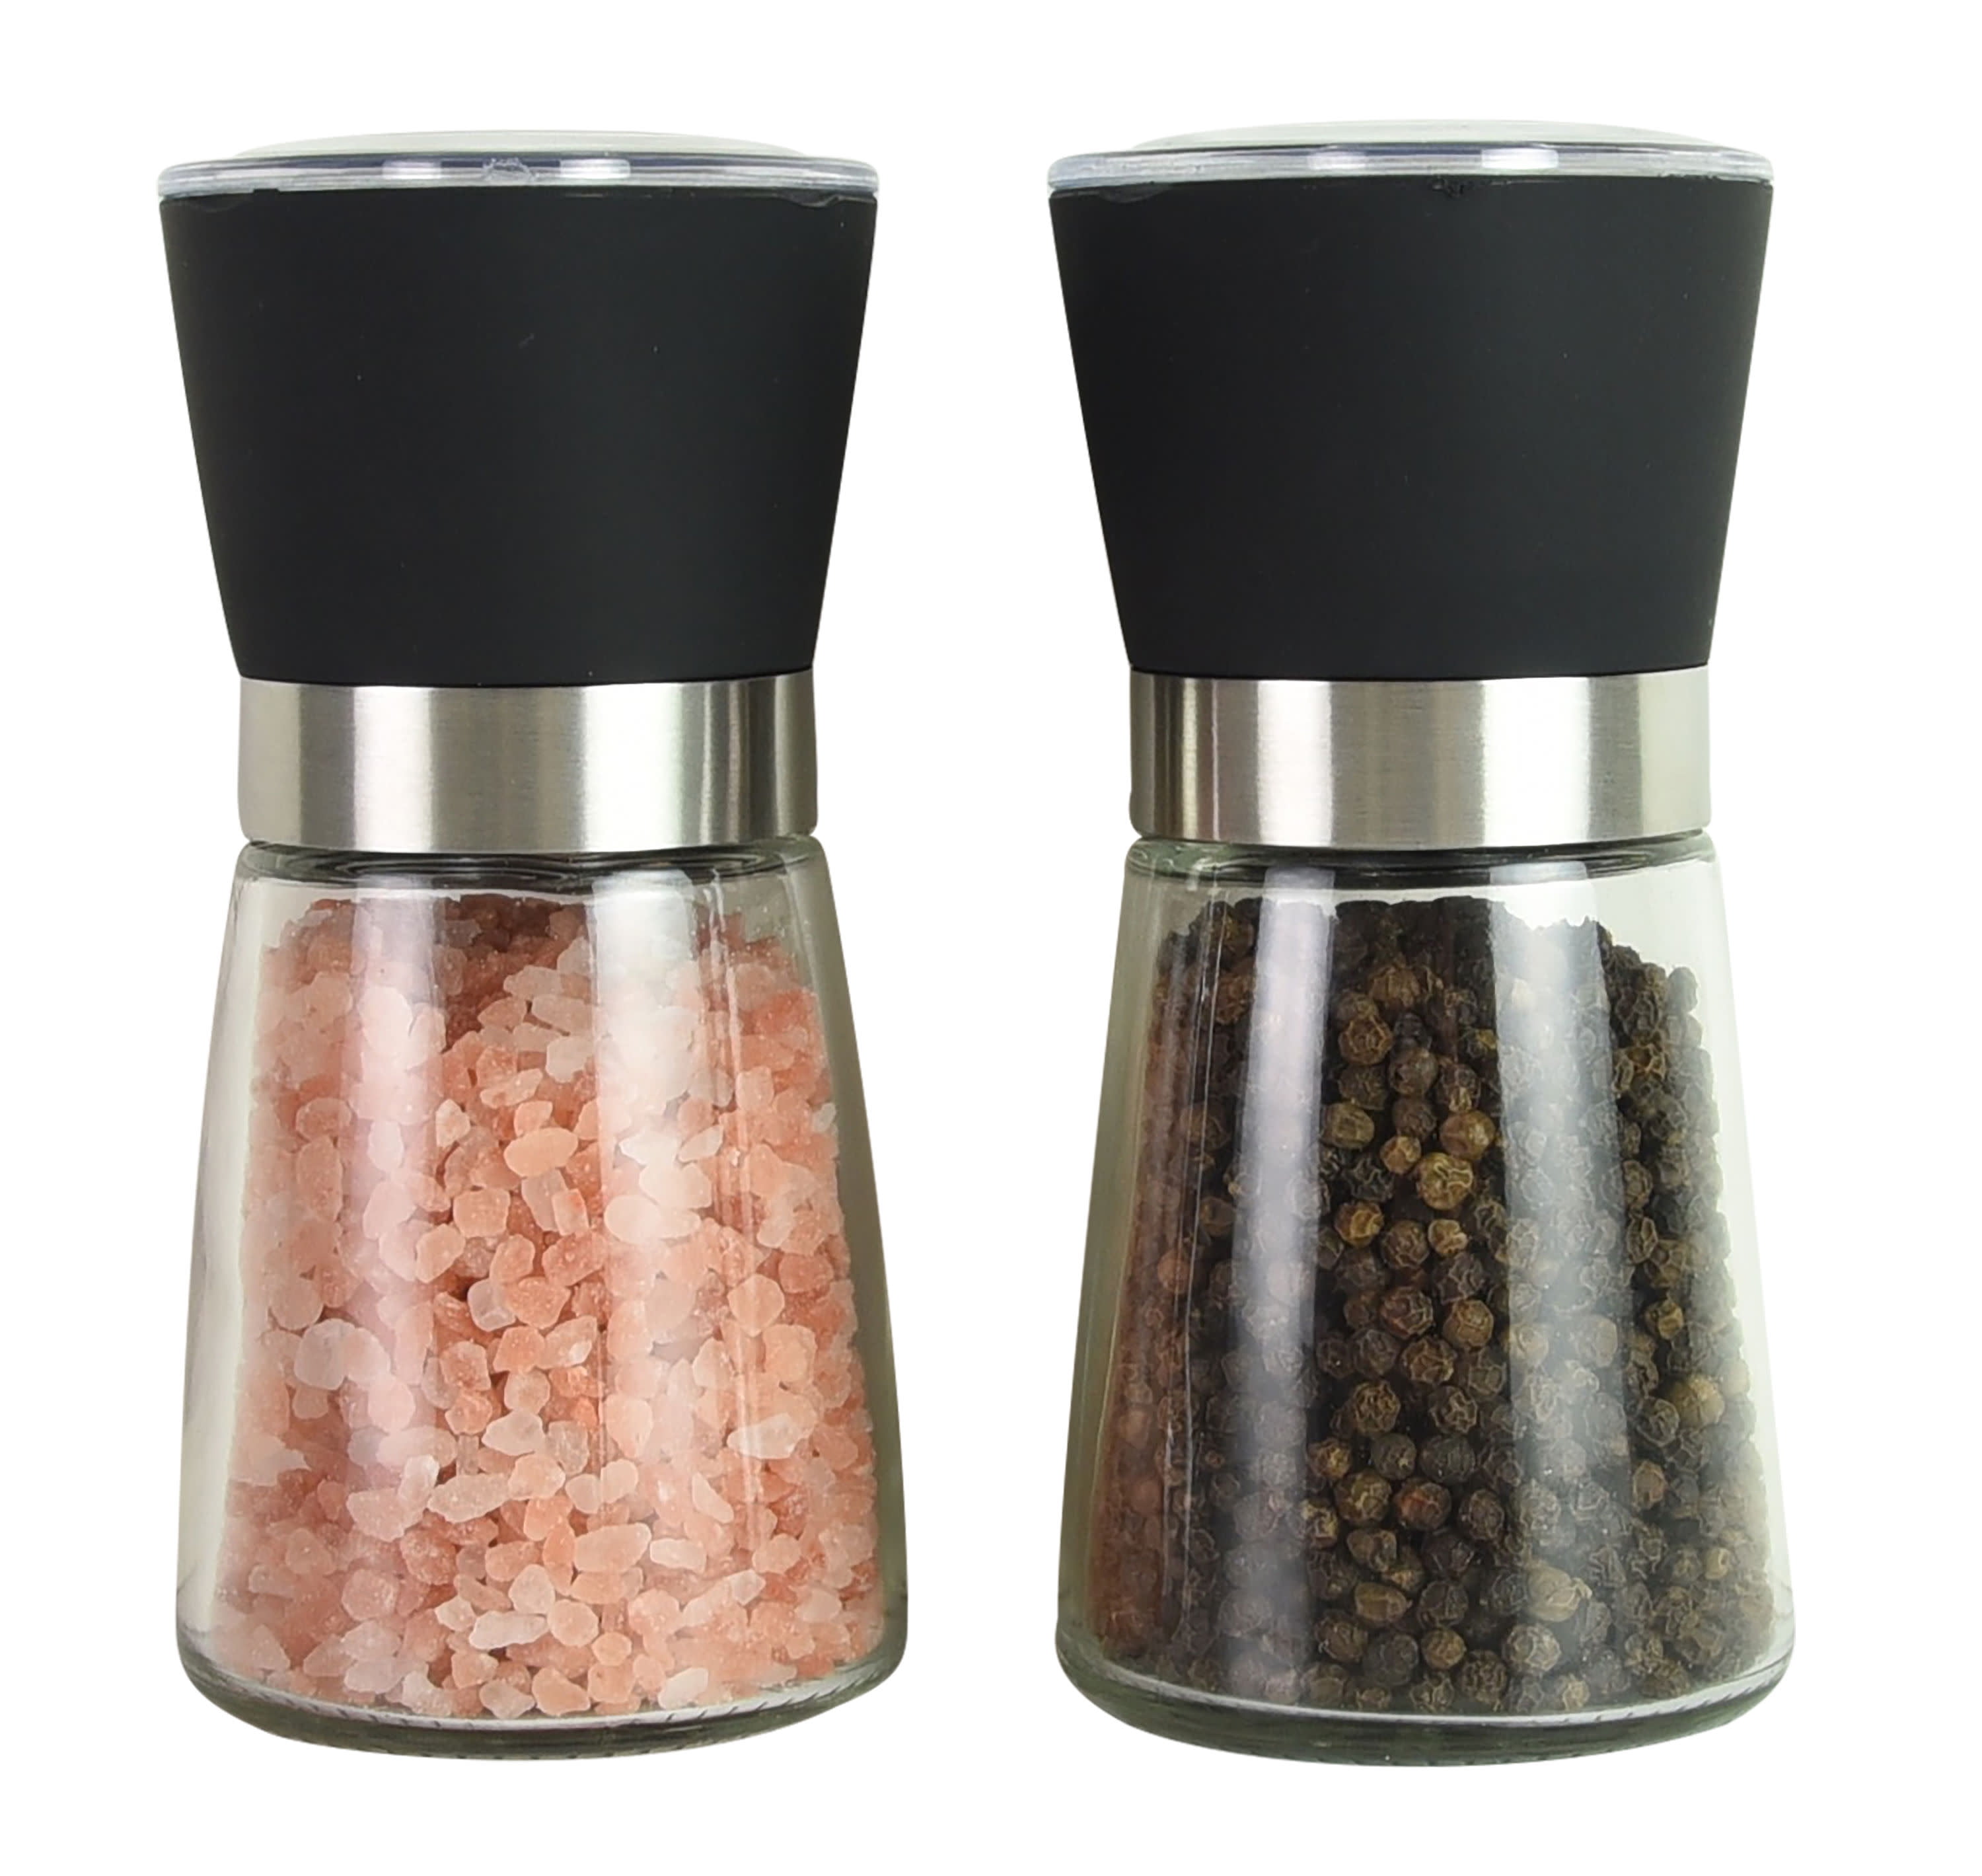 Kamenstein Set of Two 5-inch Glass Grinders Pink Salt and